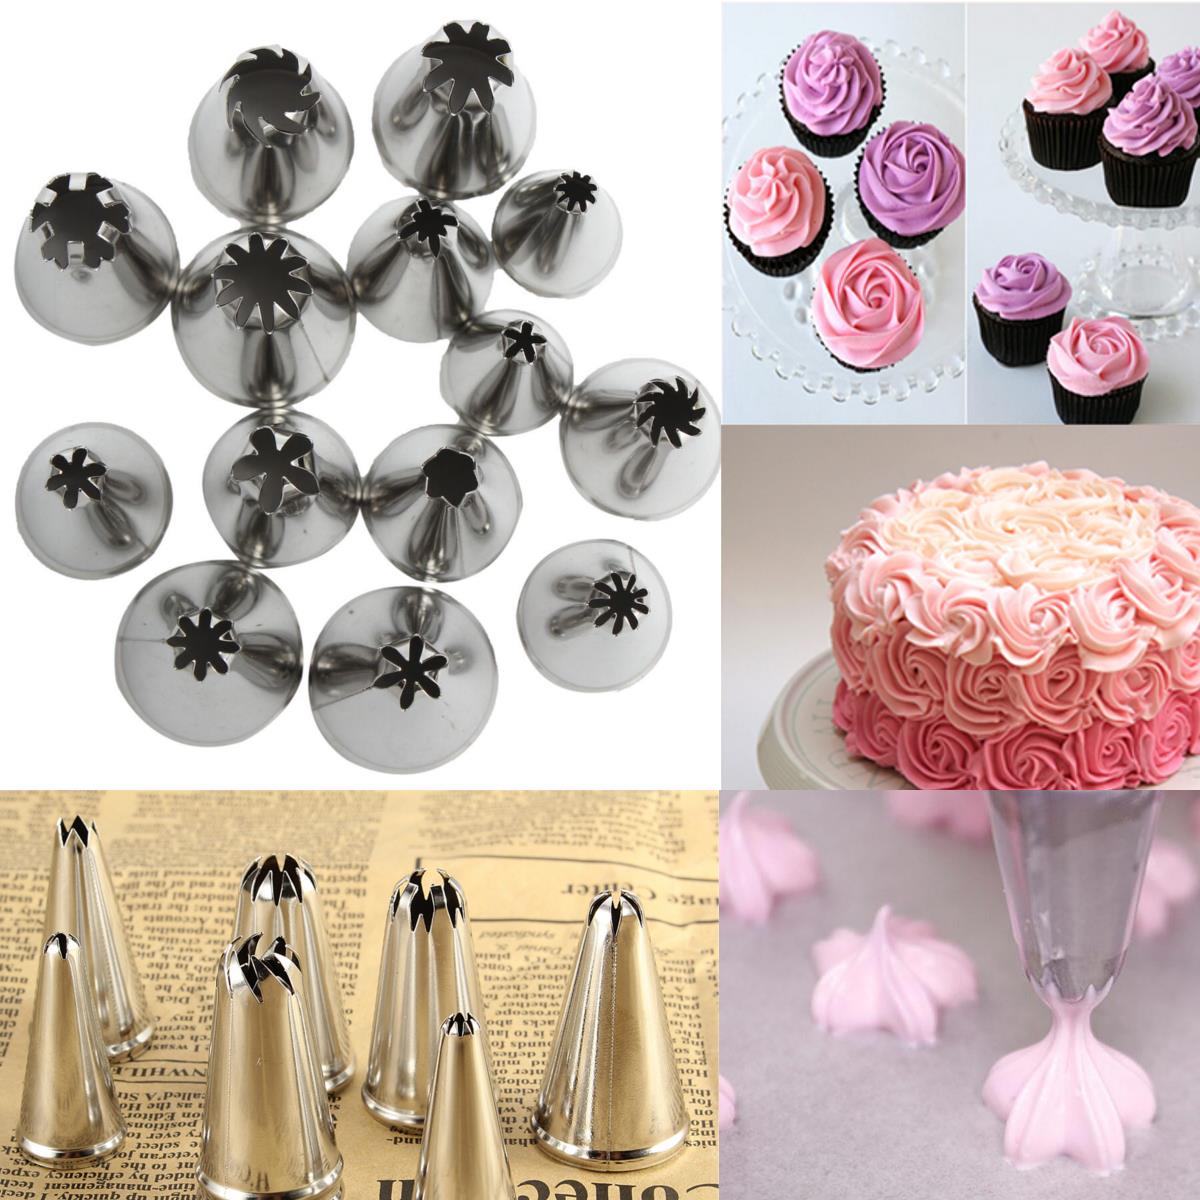 14Pcs-Stainless-Steel-Flower-Icing-Piping-Nozzles-Cake-Pastry-Decorating-Accessories-Baking-Tool-1136548-6